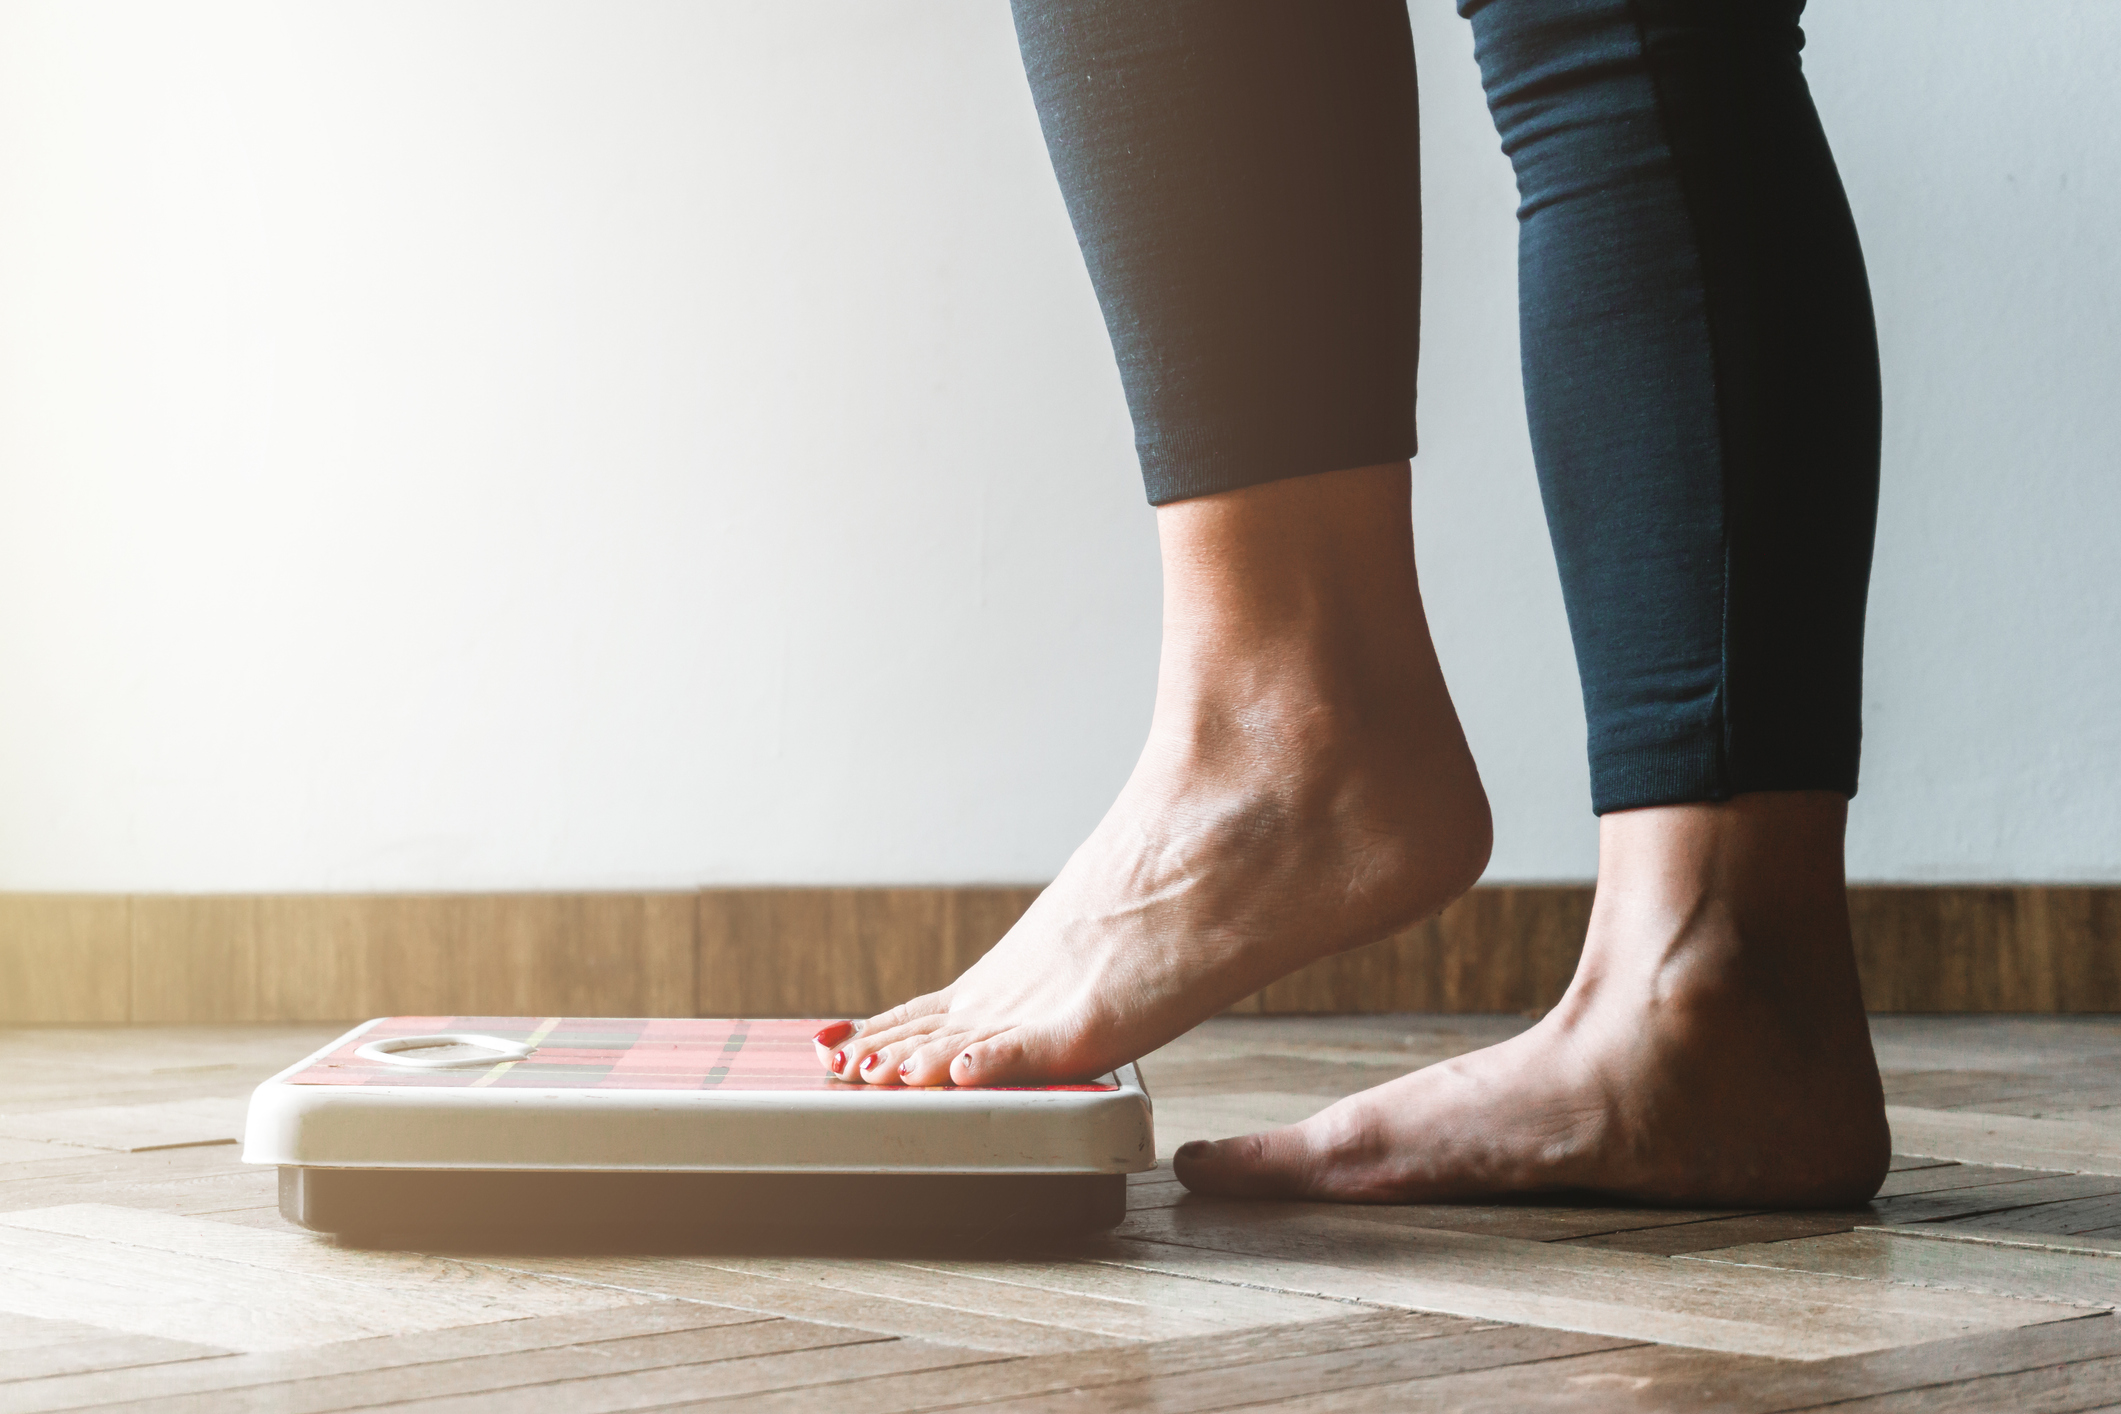 When Should You Weigh Yourself To Accurately Track Weight Loss